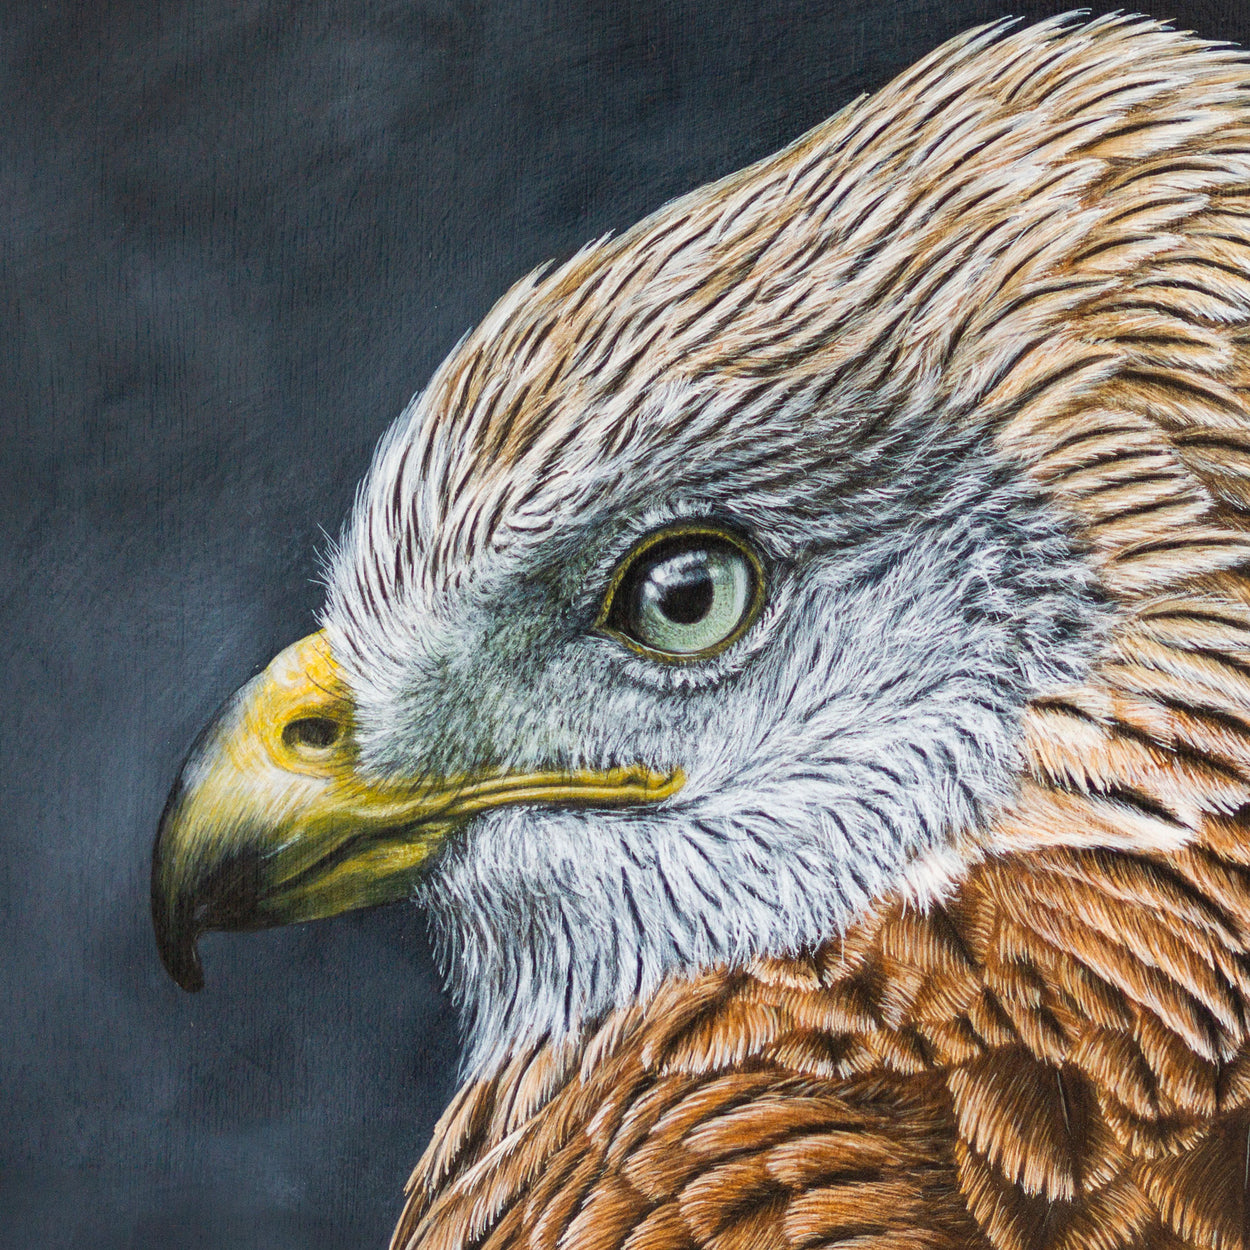 Red Kite Portrait Painting Close-up 1 - Jill Dimond